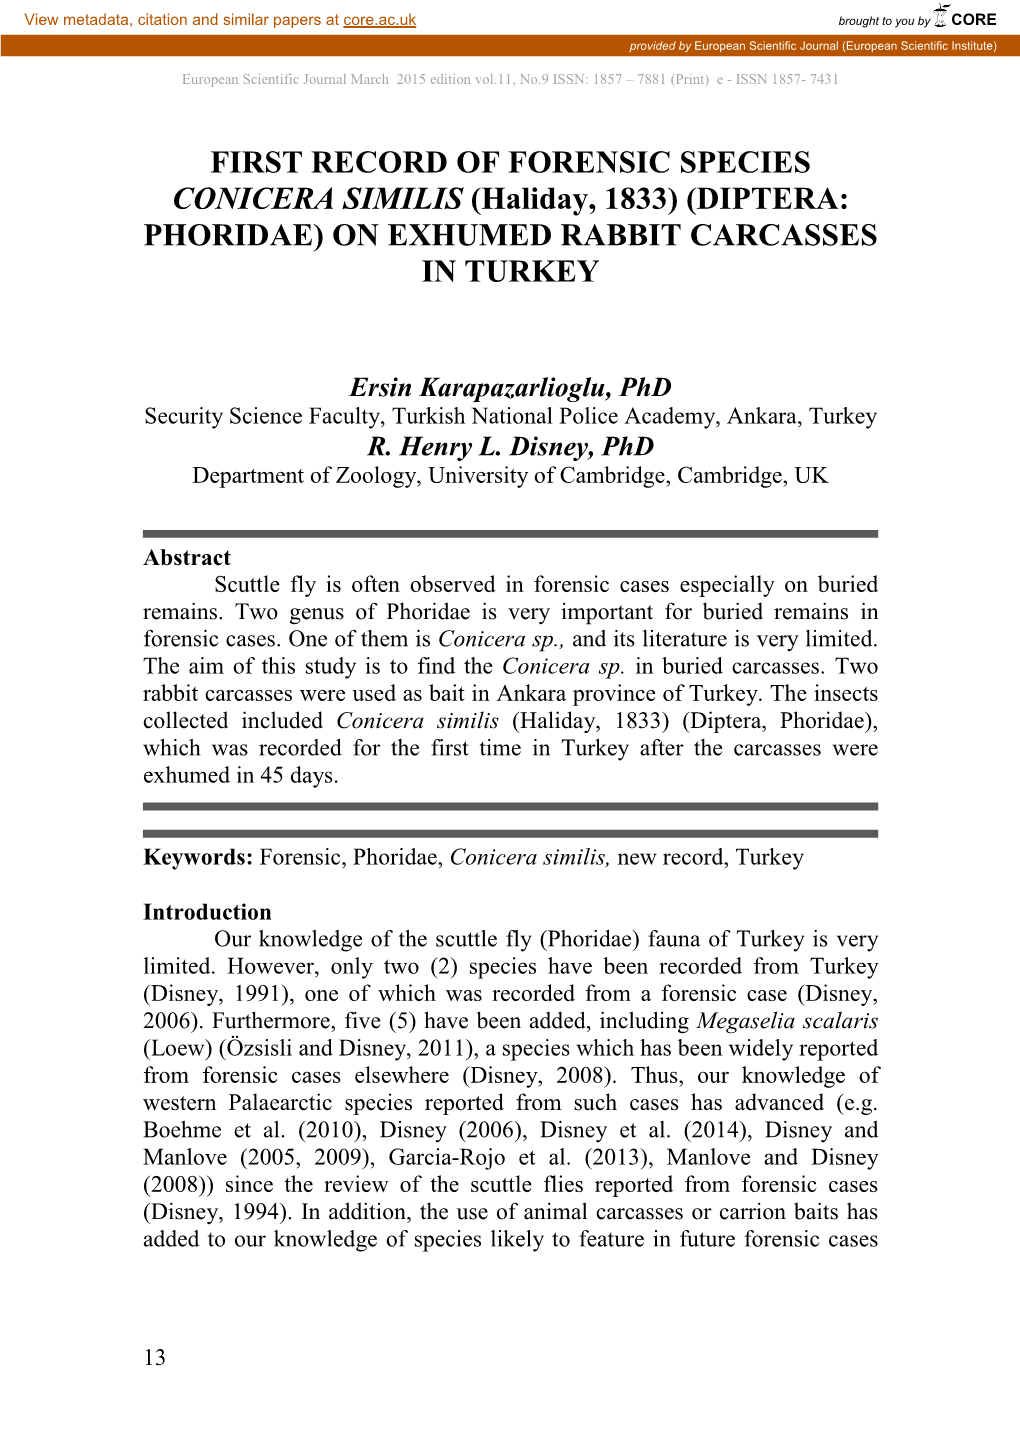 FIRST RECORD of FORENSIC SPECIES CONICERA SIMILIS (Haliday, 1833) (DIPTERA: PHORIDAE) on EXHUMED RABBIT CARCASSES in TURKEY